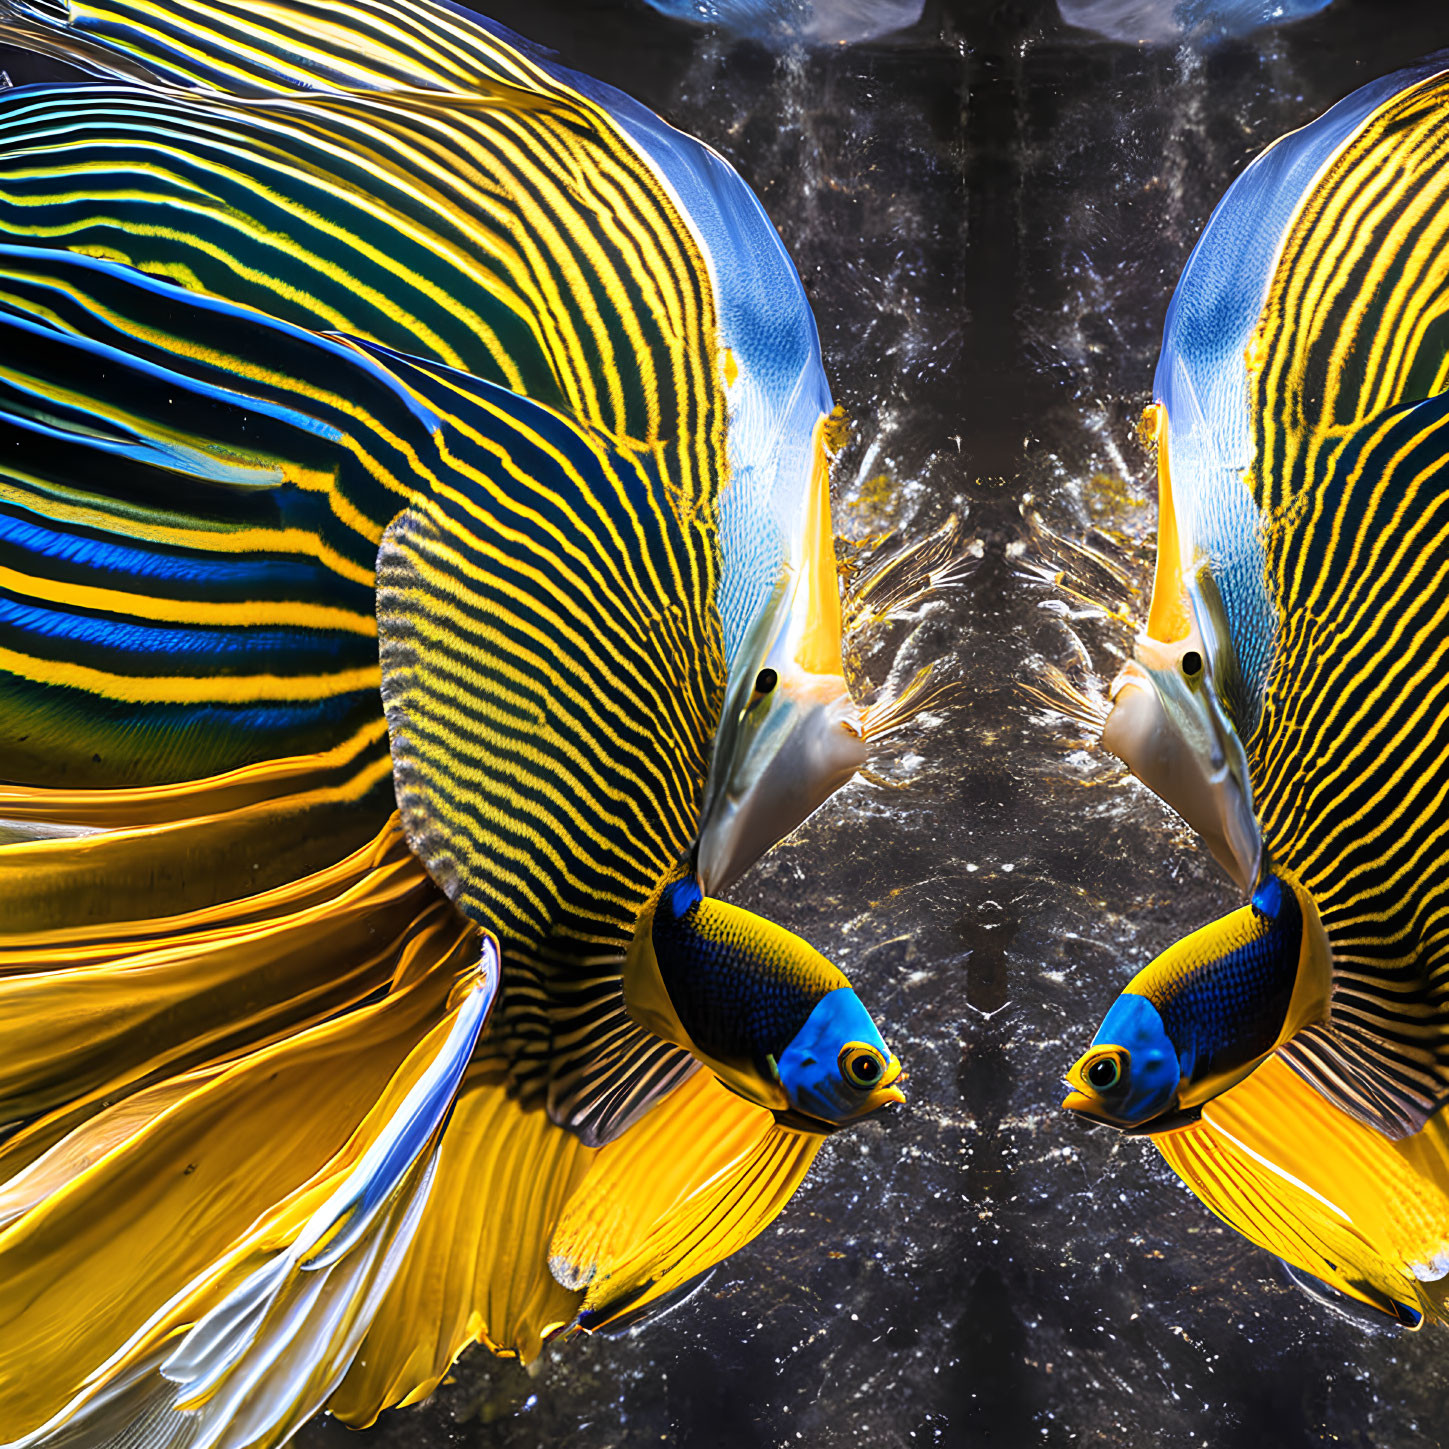 Vibrant Emperor Angelfish with Symmetrical Patterns and Colors